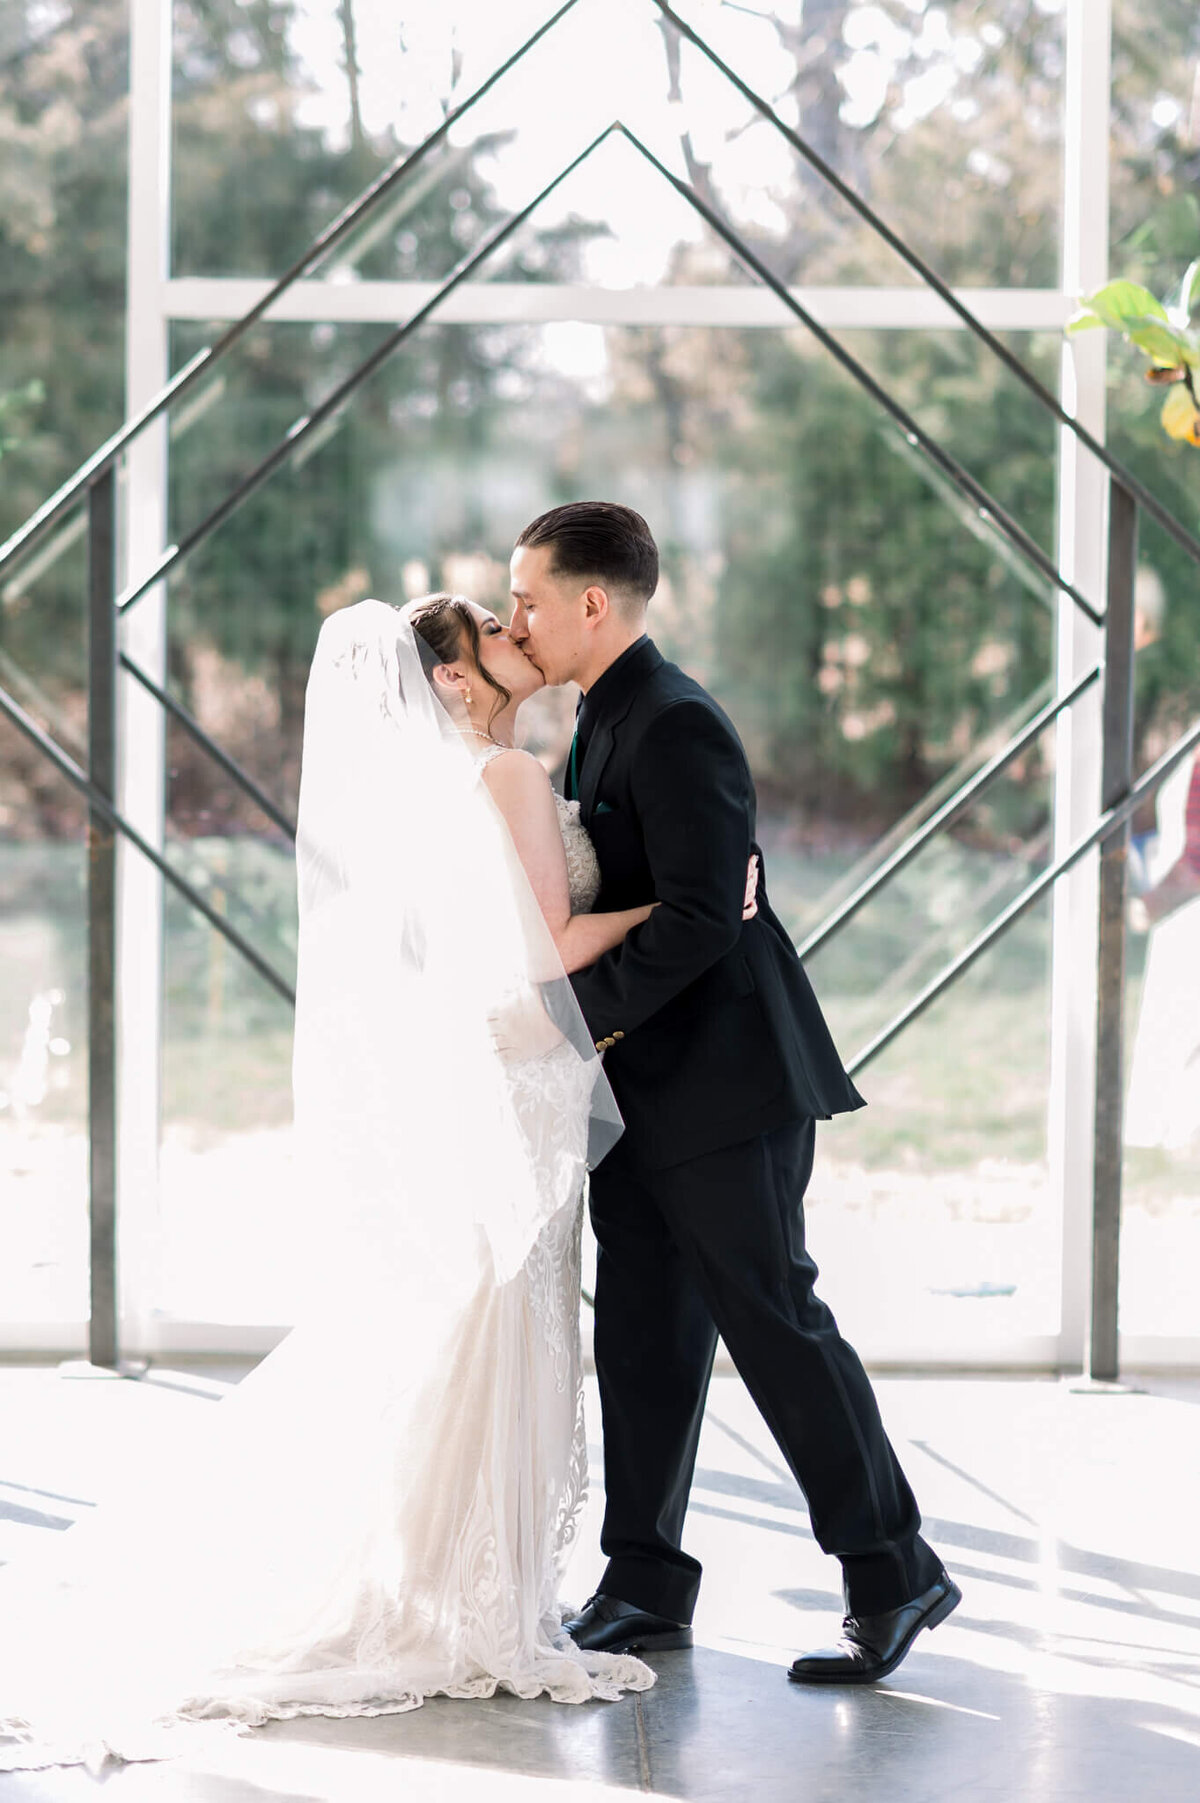 couple shares first kiss as husband and wife, bride wears white dress with hip length veil, groom wears black suit, wedding arbor in background is two diamonds